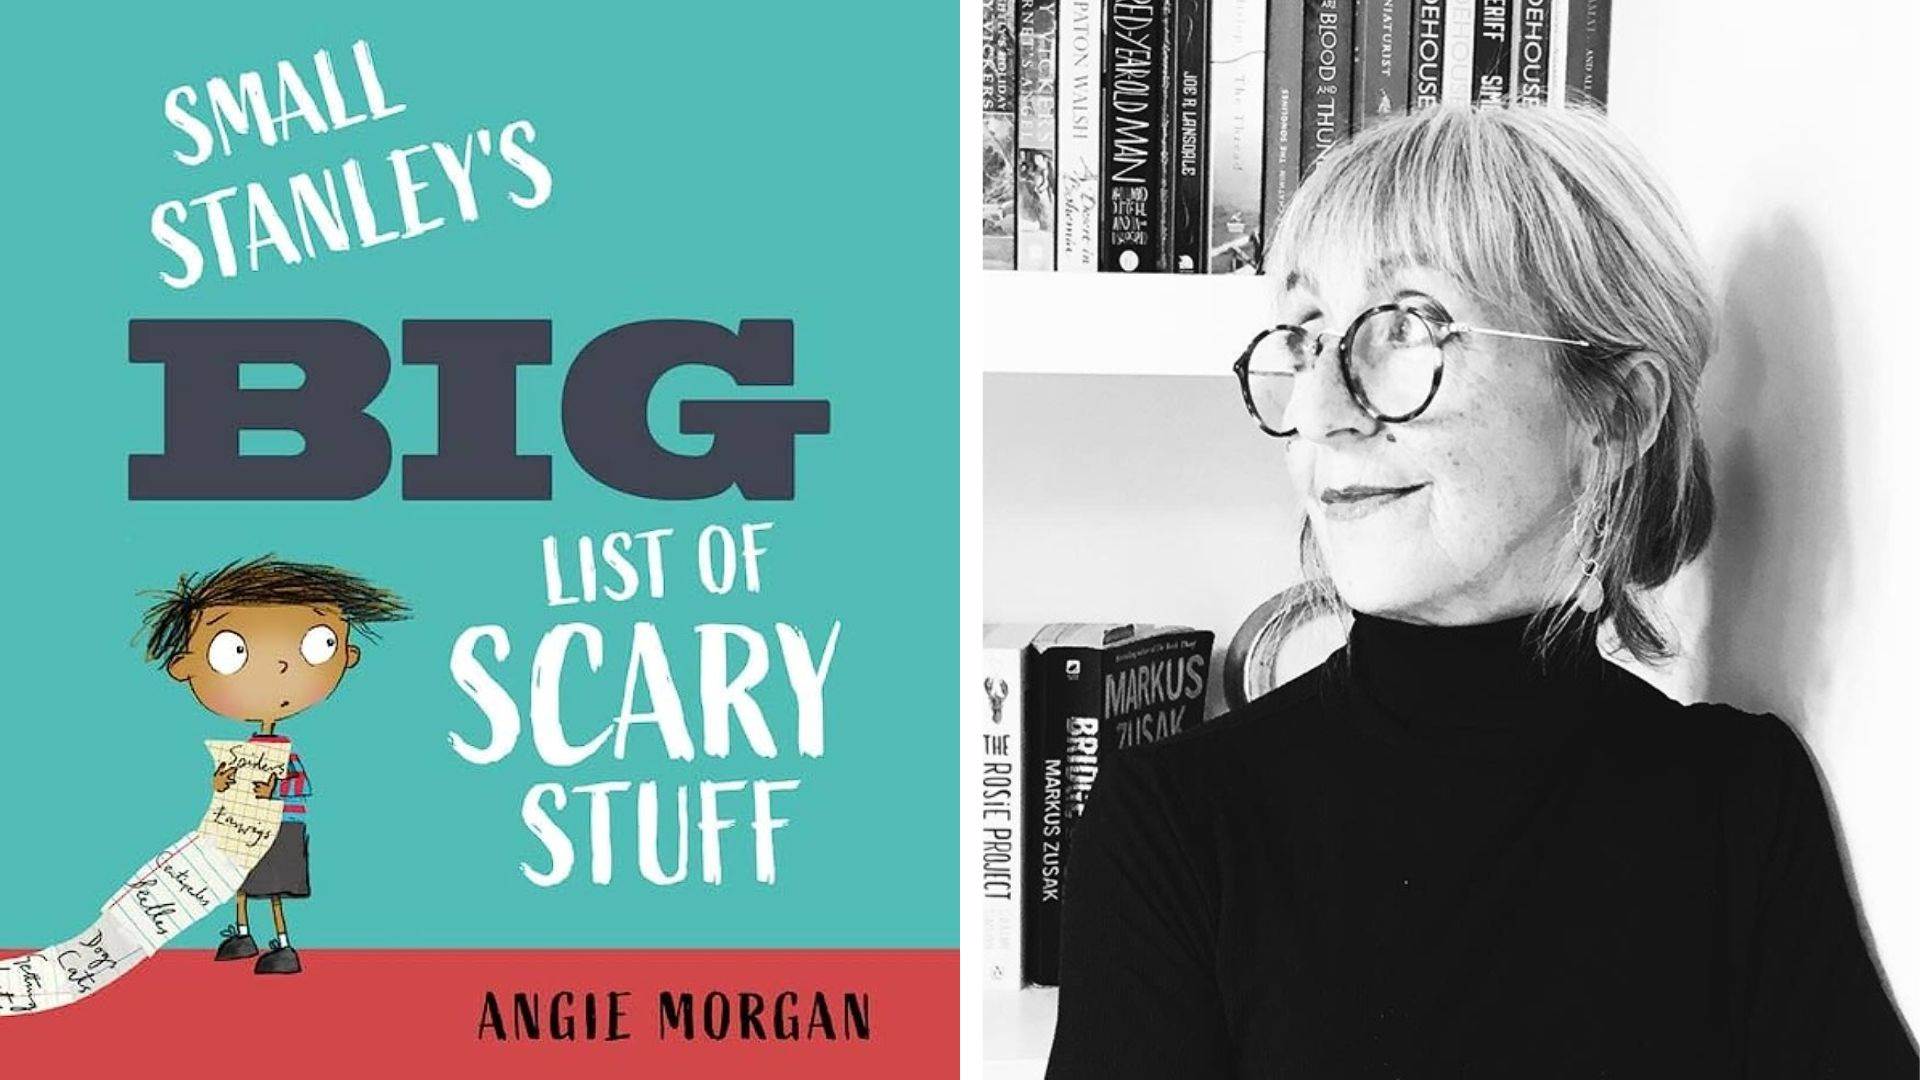 Angie Morgan and the cover of Small Stanley's Big List of Scary Stuff